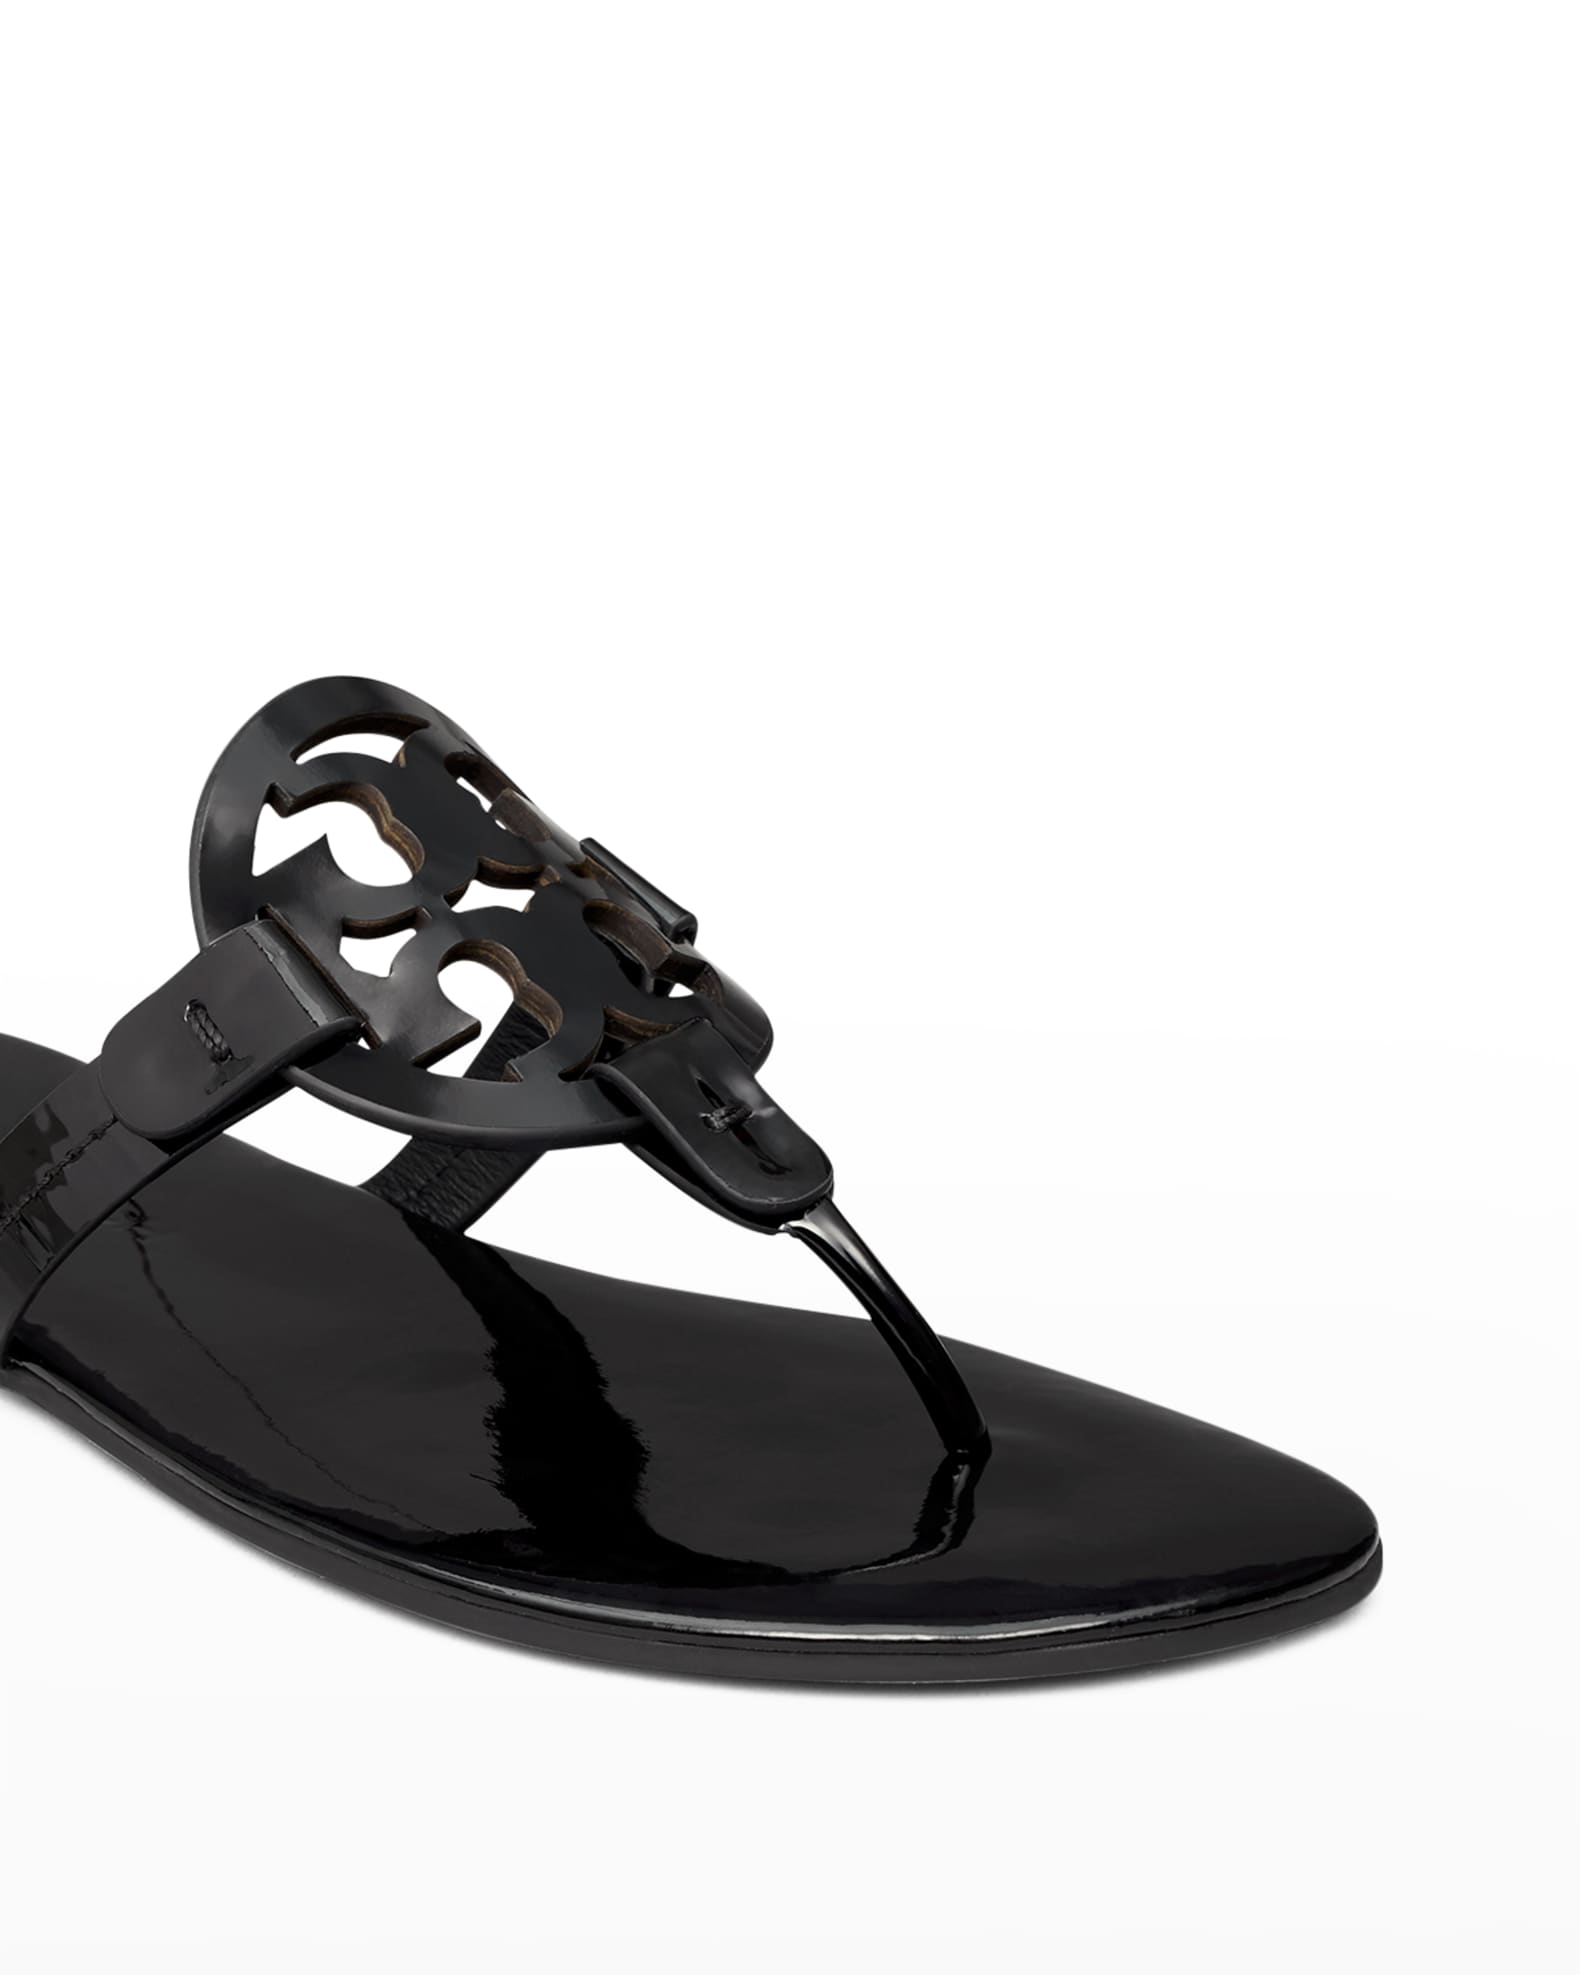 Tory Burch Miller Soft Patent Leather Sandals | Neiman Marcus